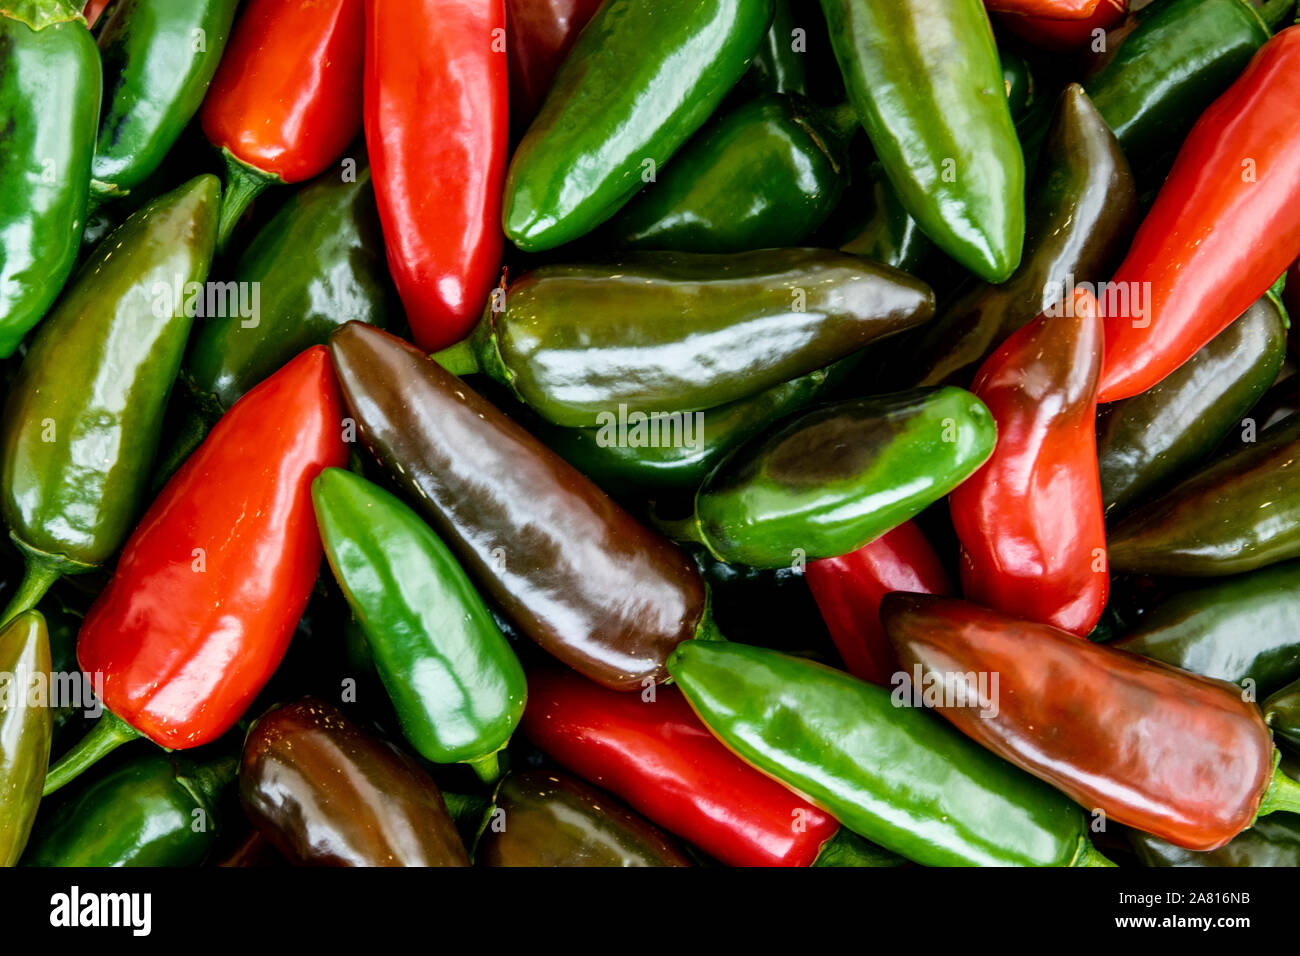 Pile of jalapeno peppers in various stages of maturation in the market Stock Photo